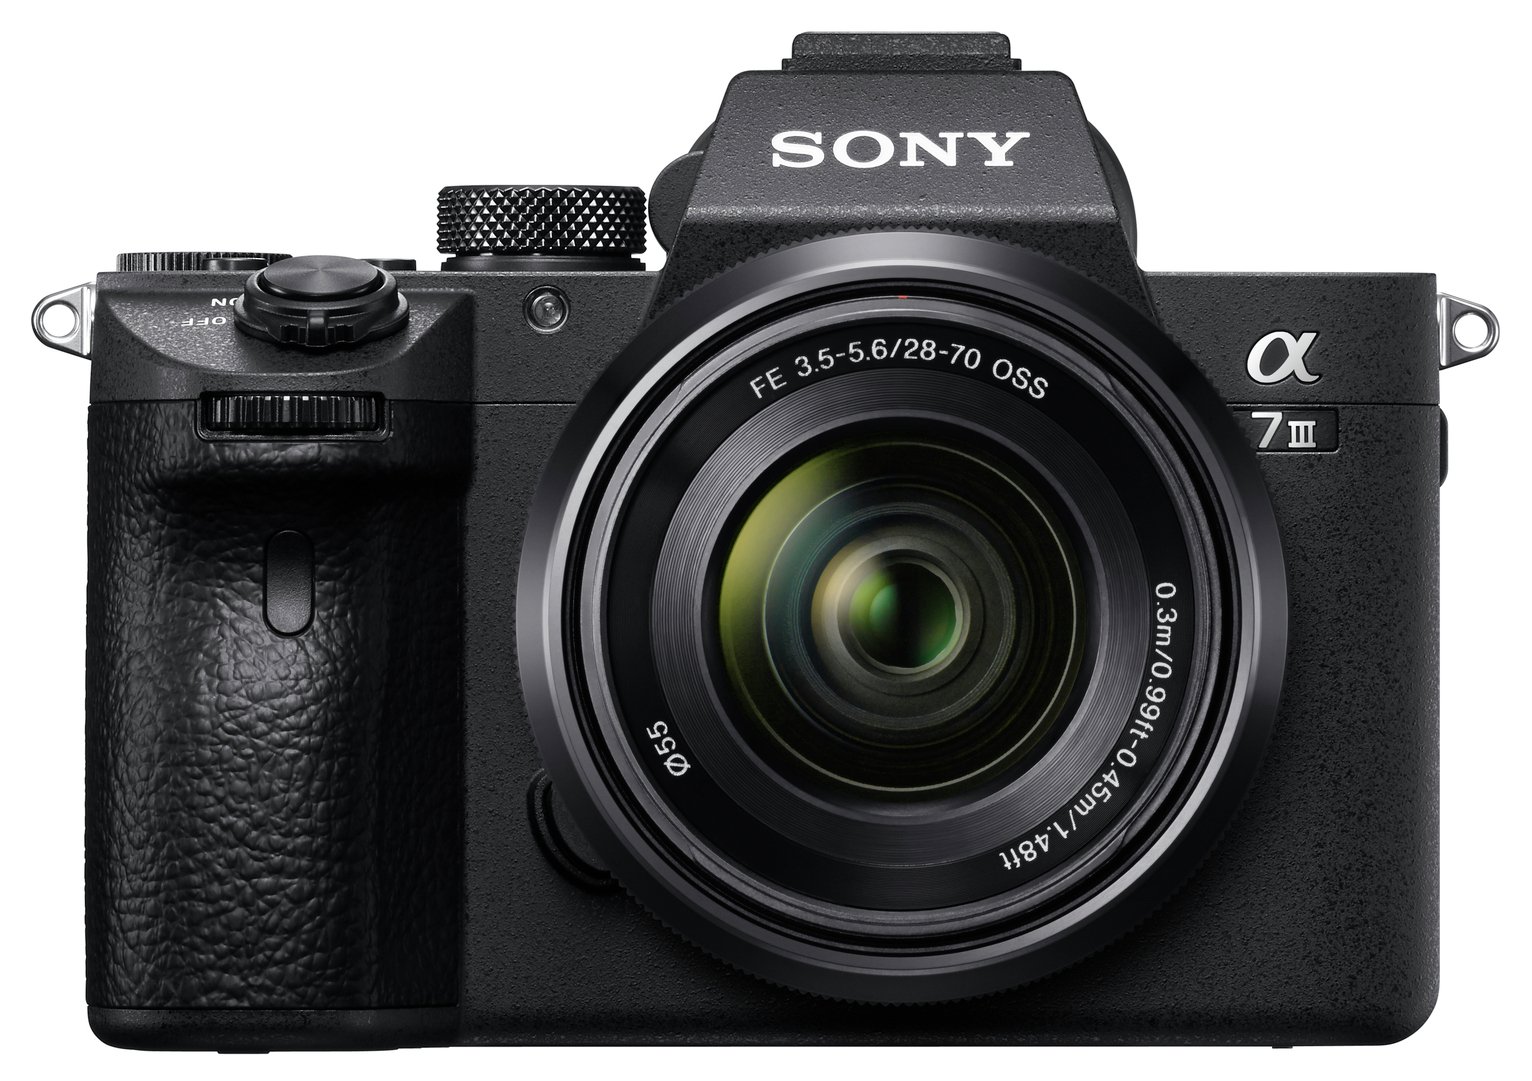 Sony Full Frame A7mk3 Camera with SEL2870 Lens Review